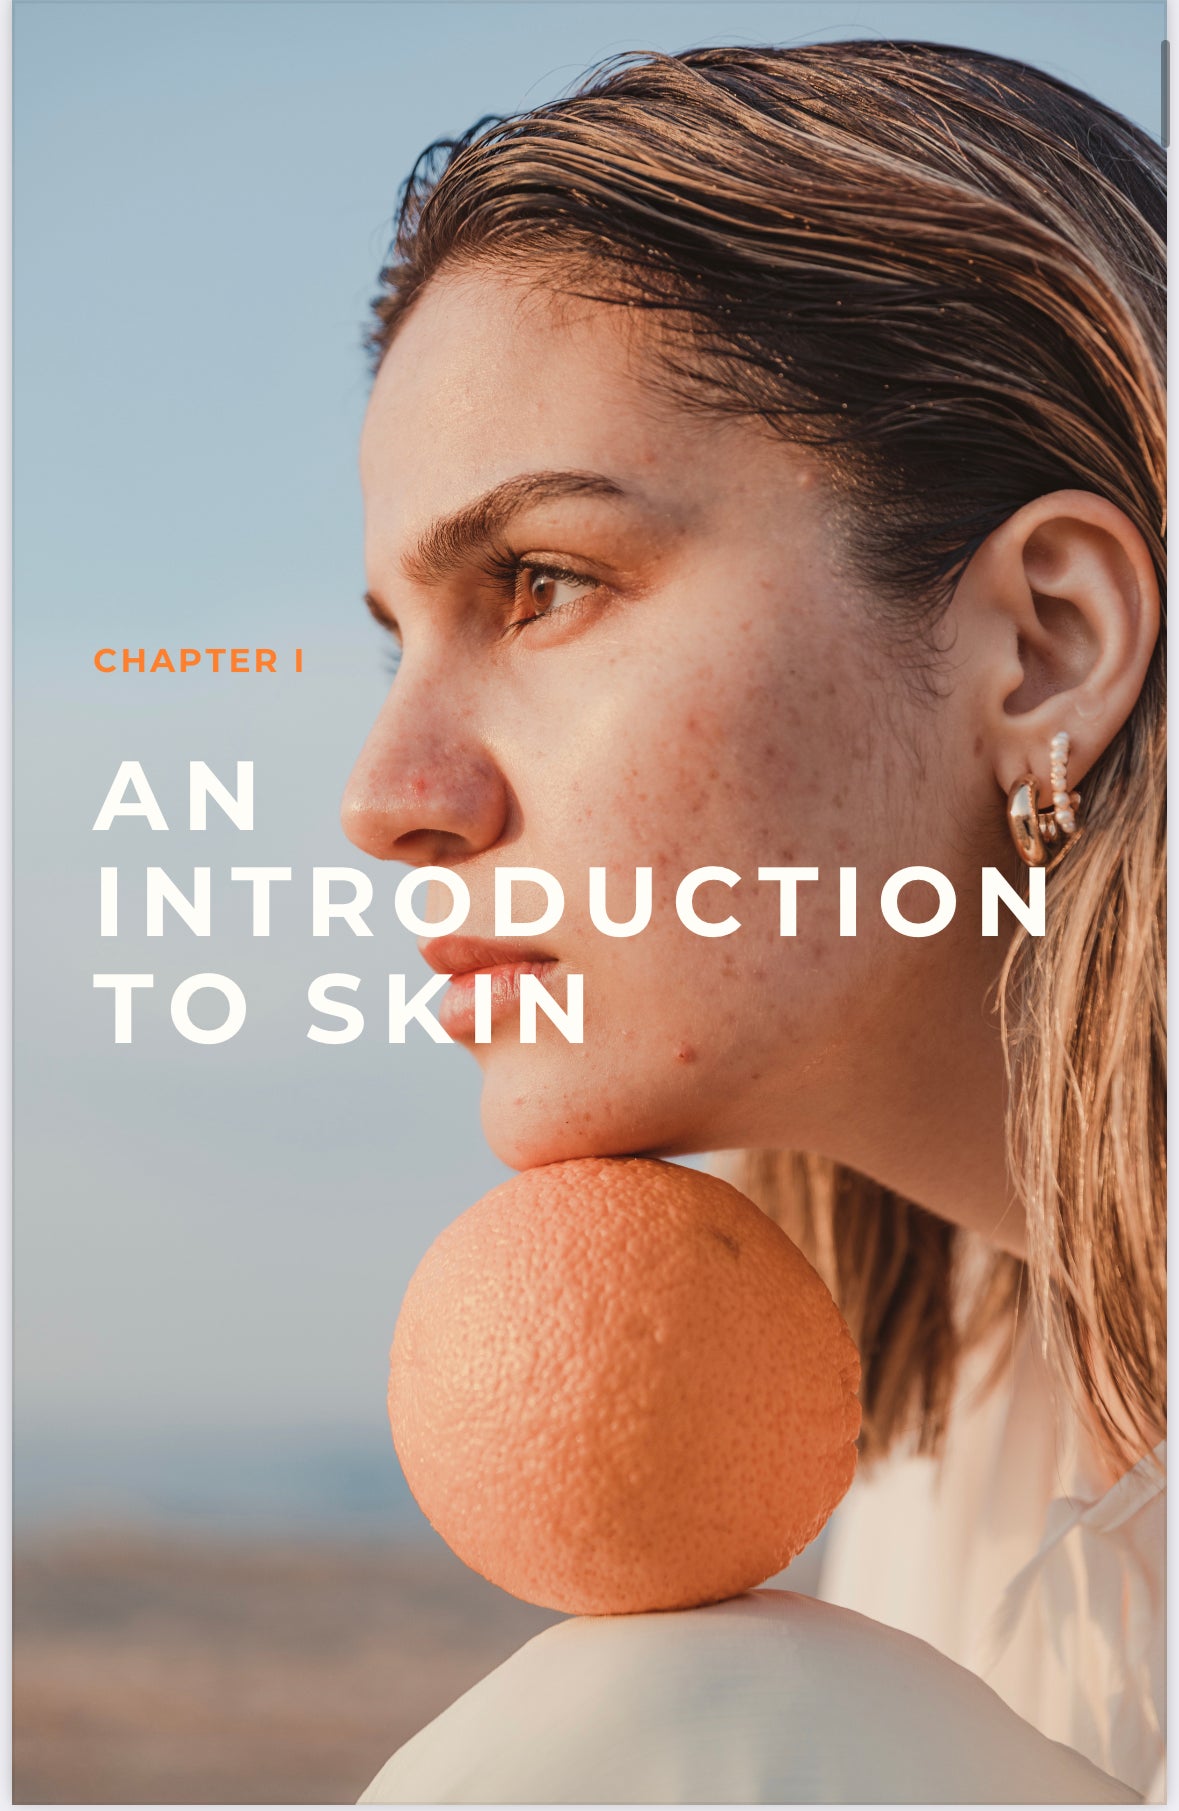 THE COMPLETE GUIDE TO HEALTHY SKIN  E-BOOK